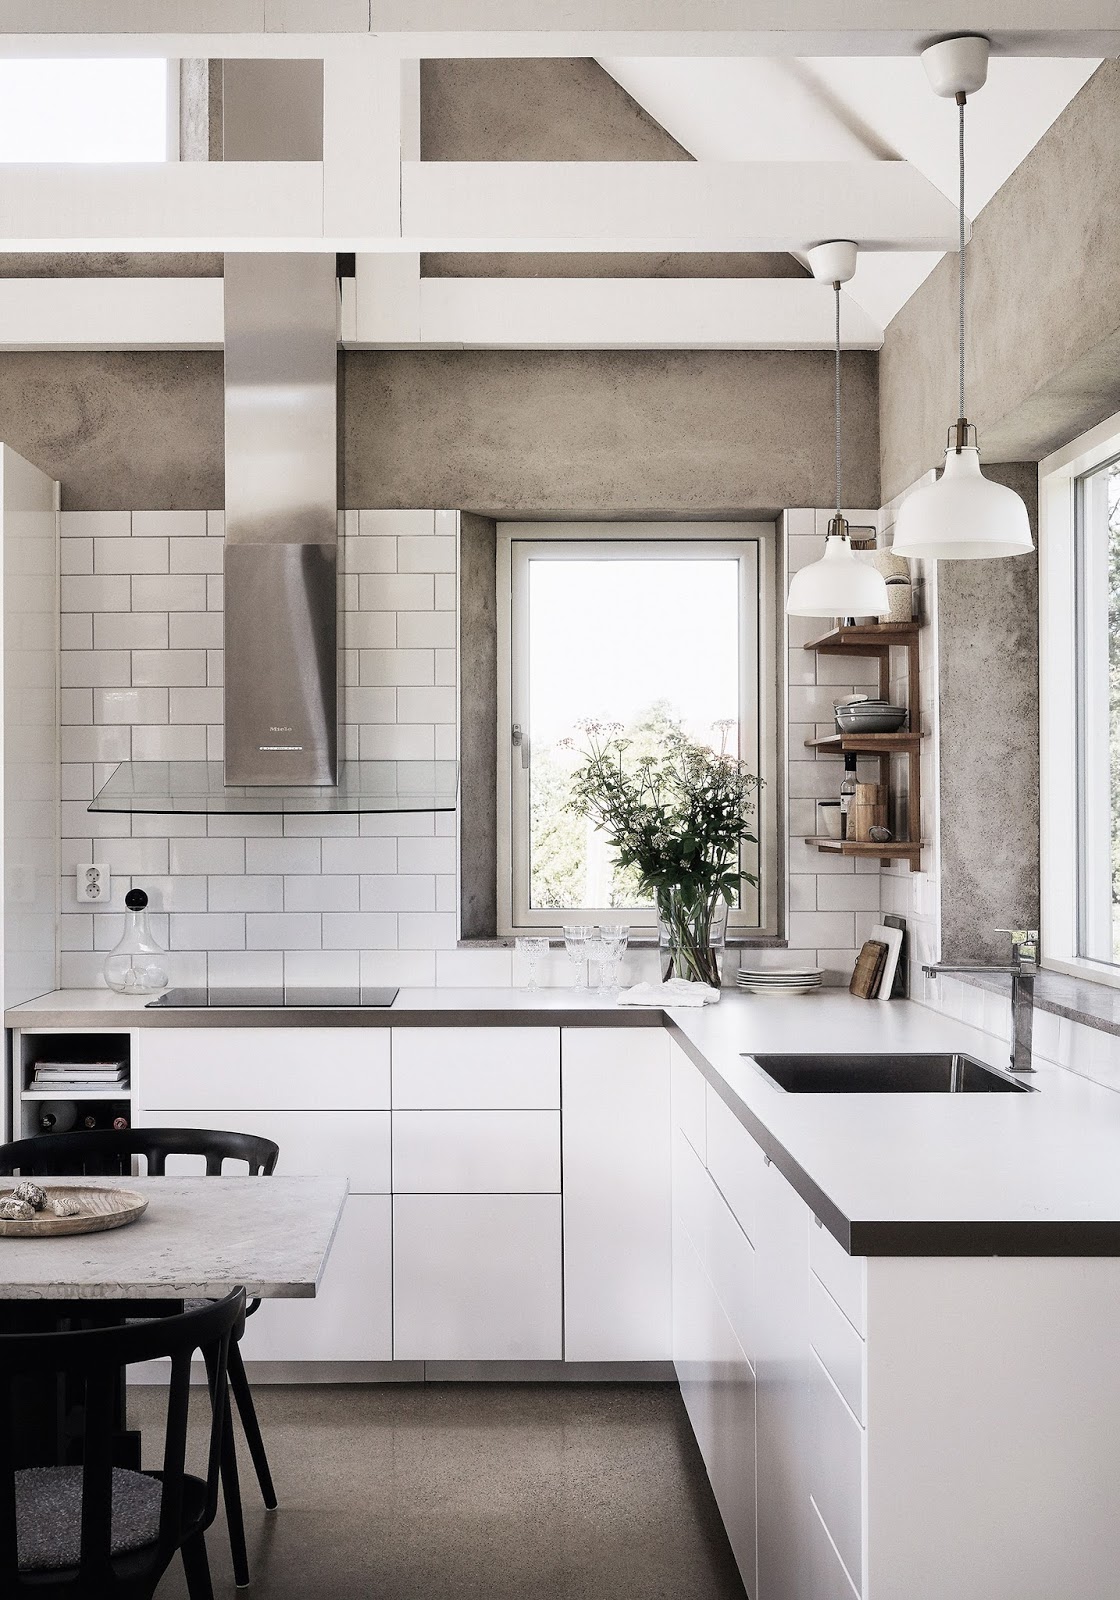 03 The kitchen is white and modern, concrete walls mix with white tiles and cabinets